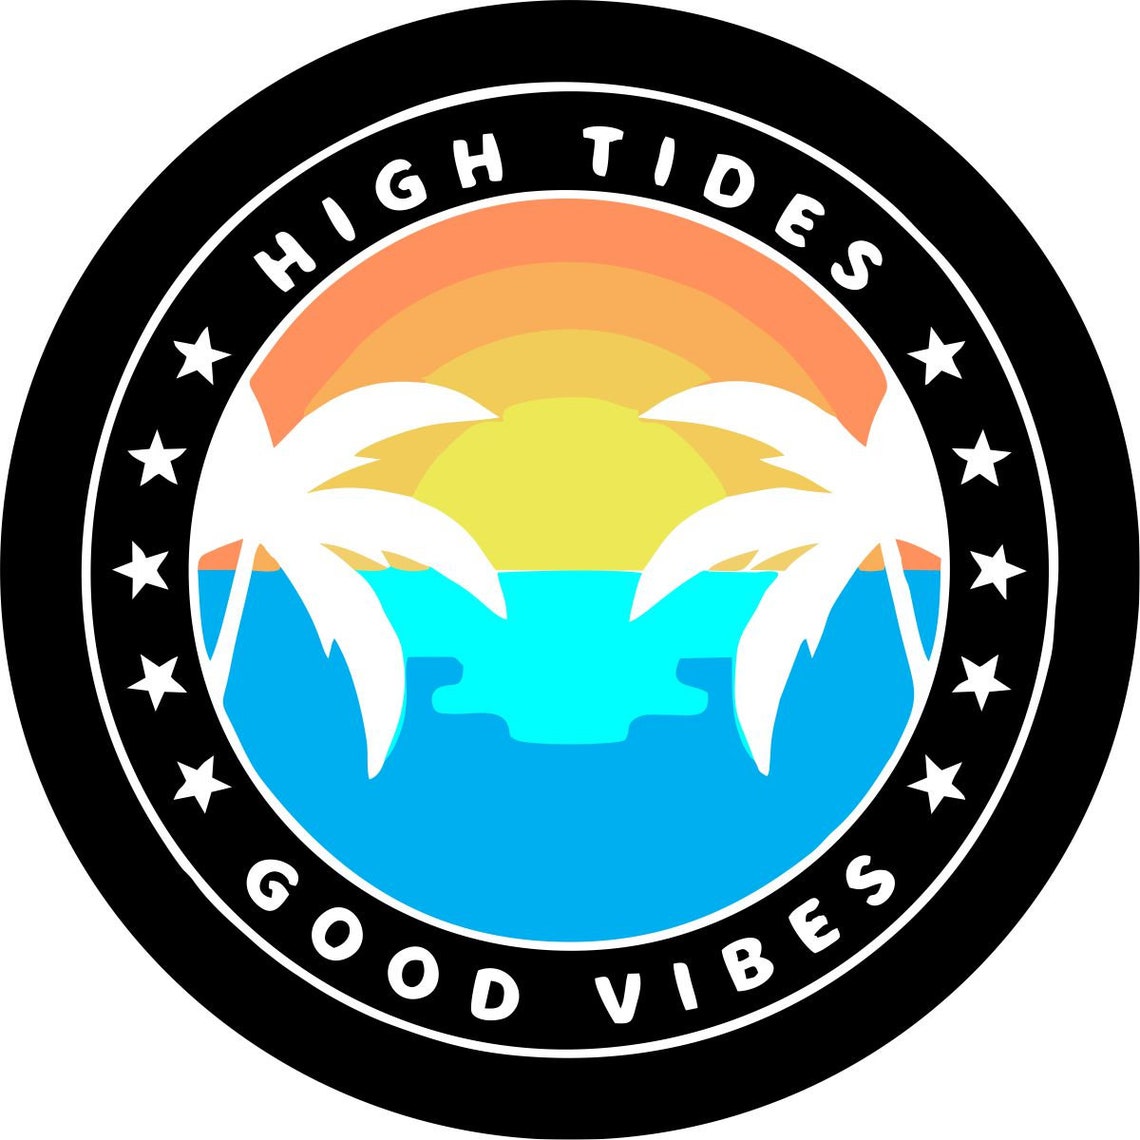 High Tides and Good Vibes Sunset Scene